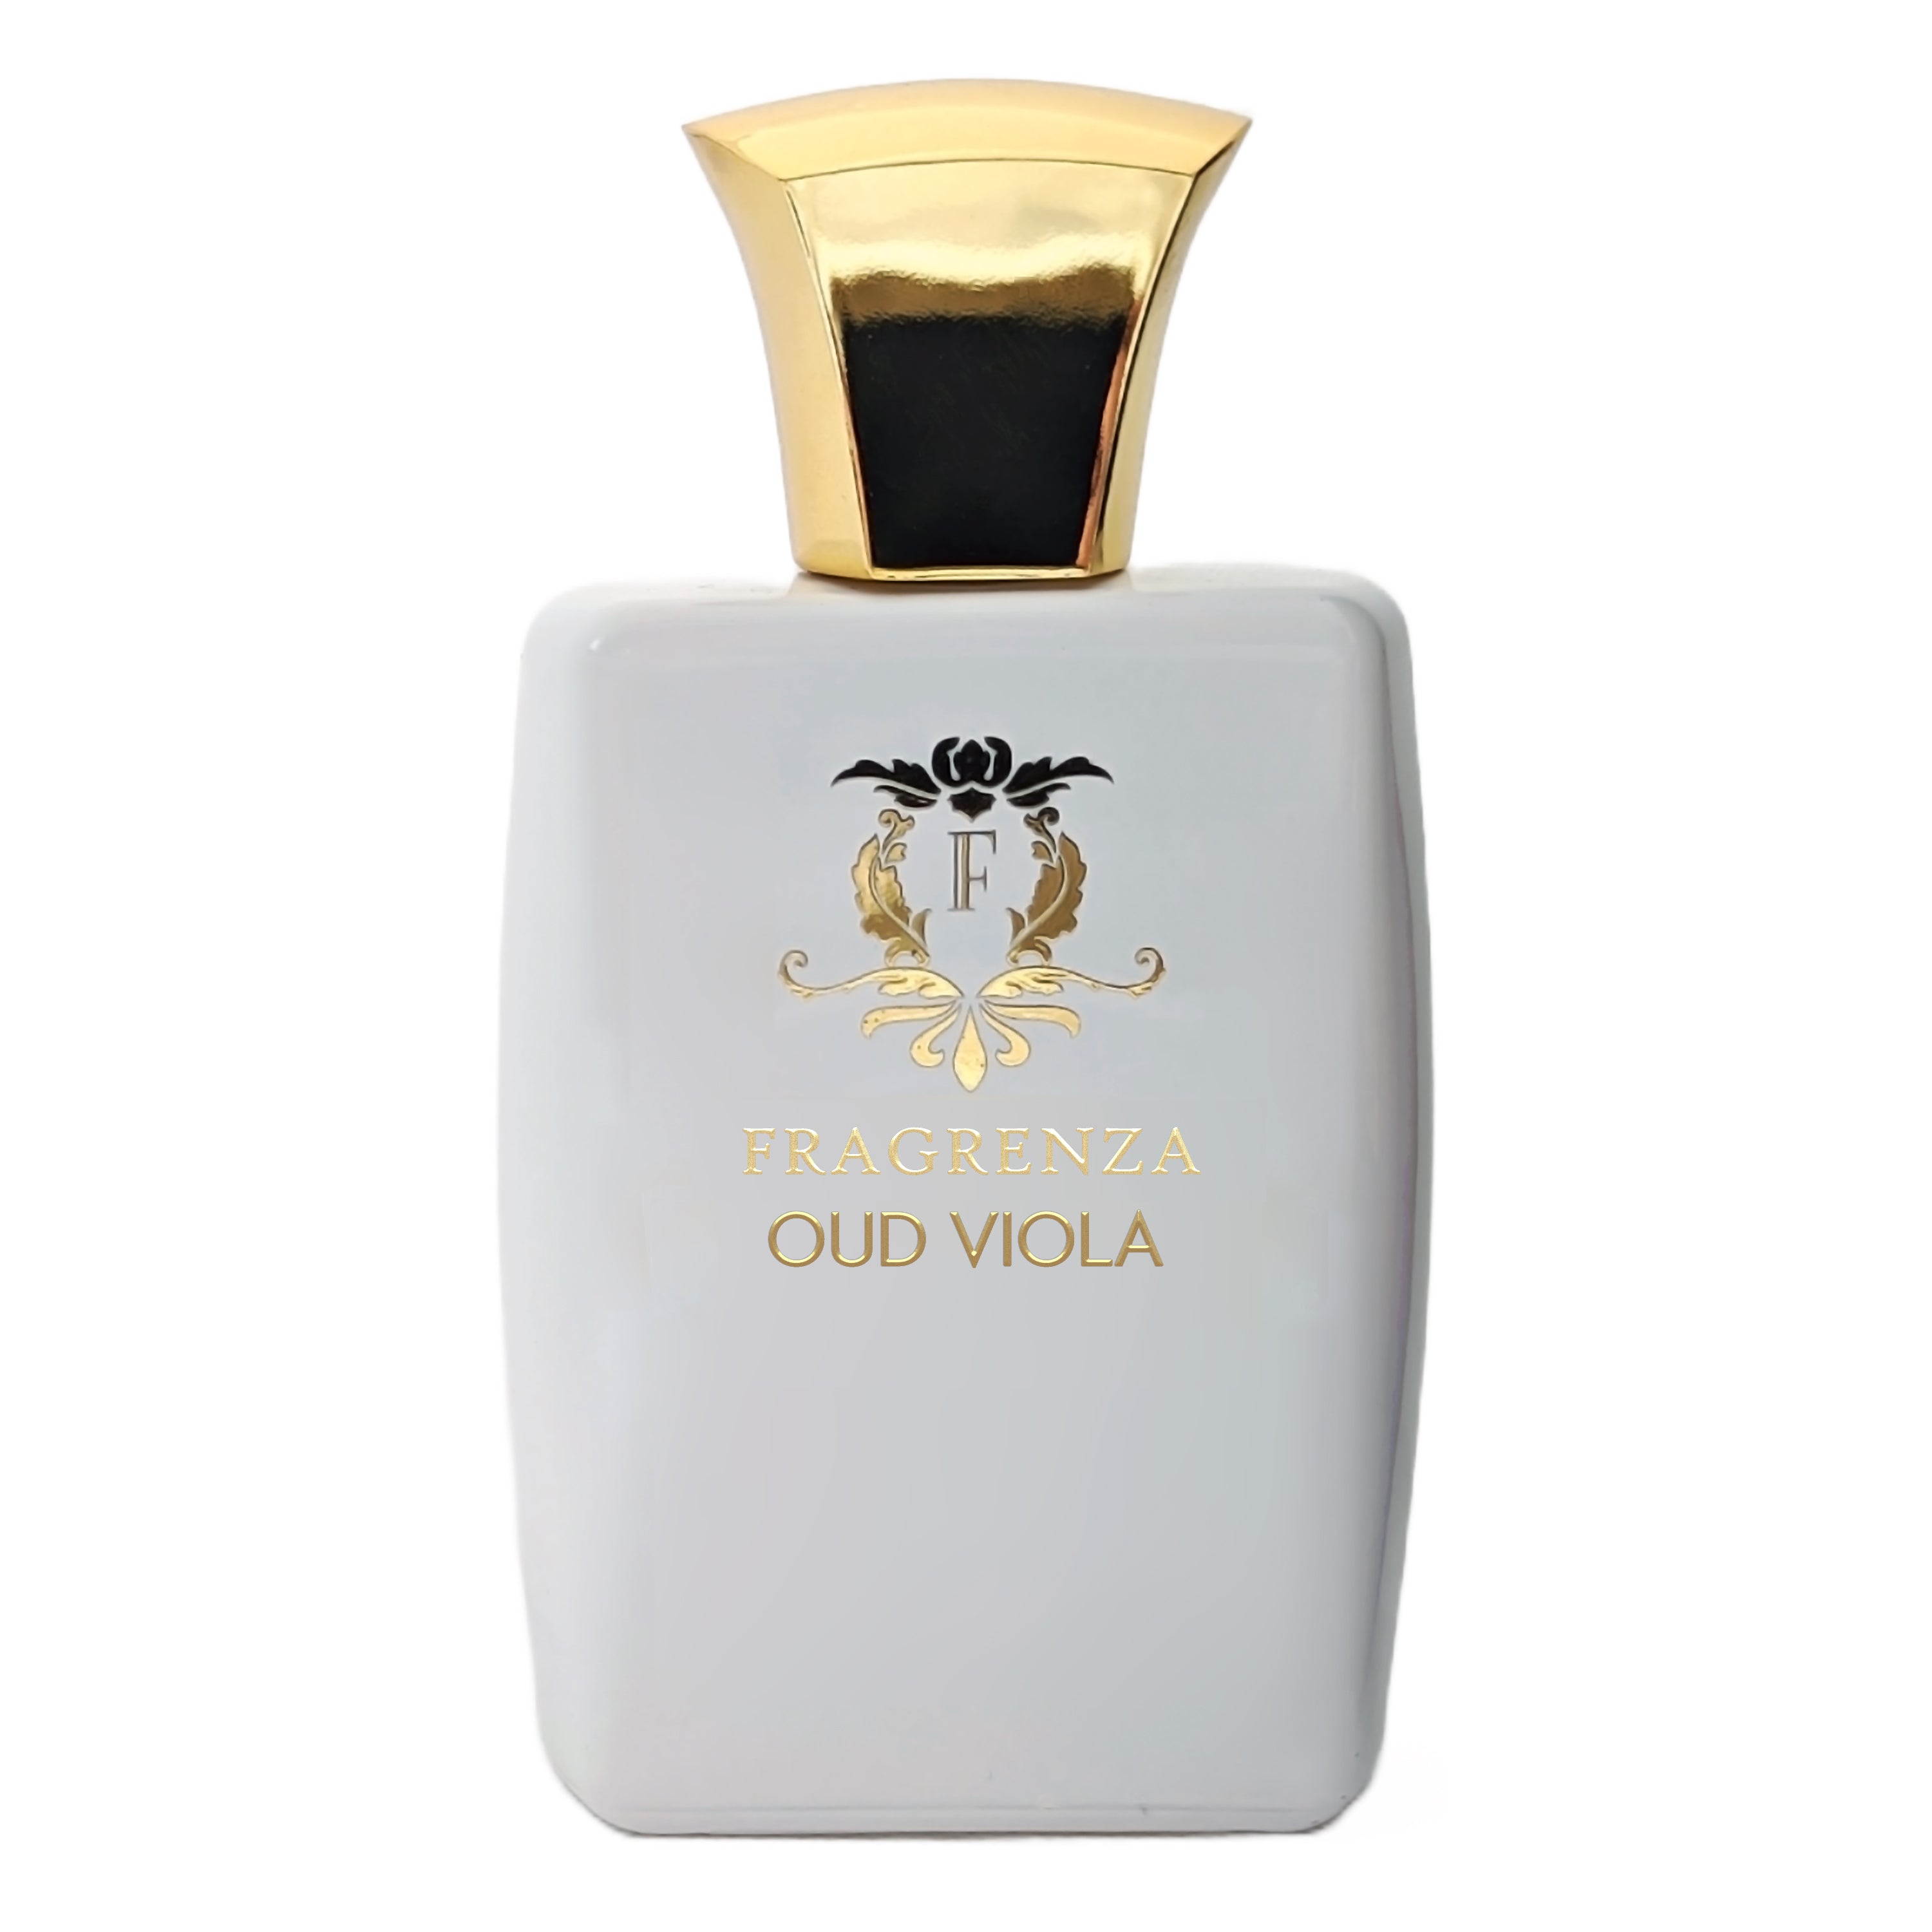 Dior Purple Oud Inspired Luxe Fragrance - Oud Viola – Fragrenza